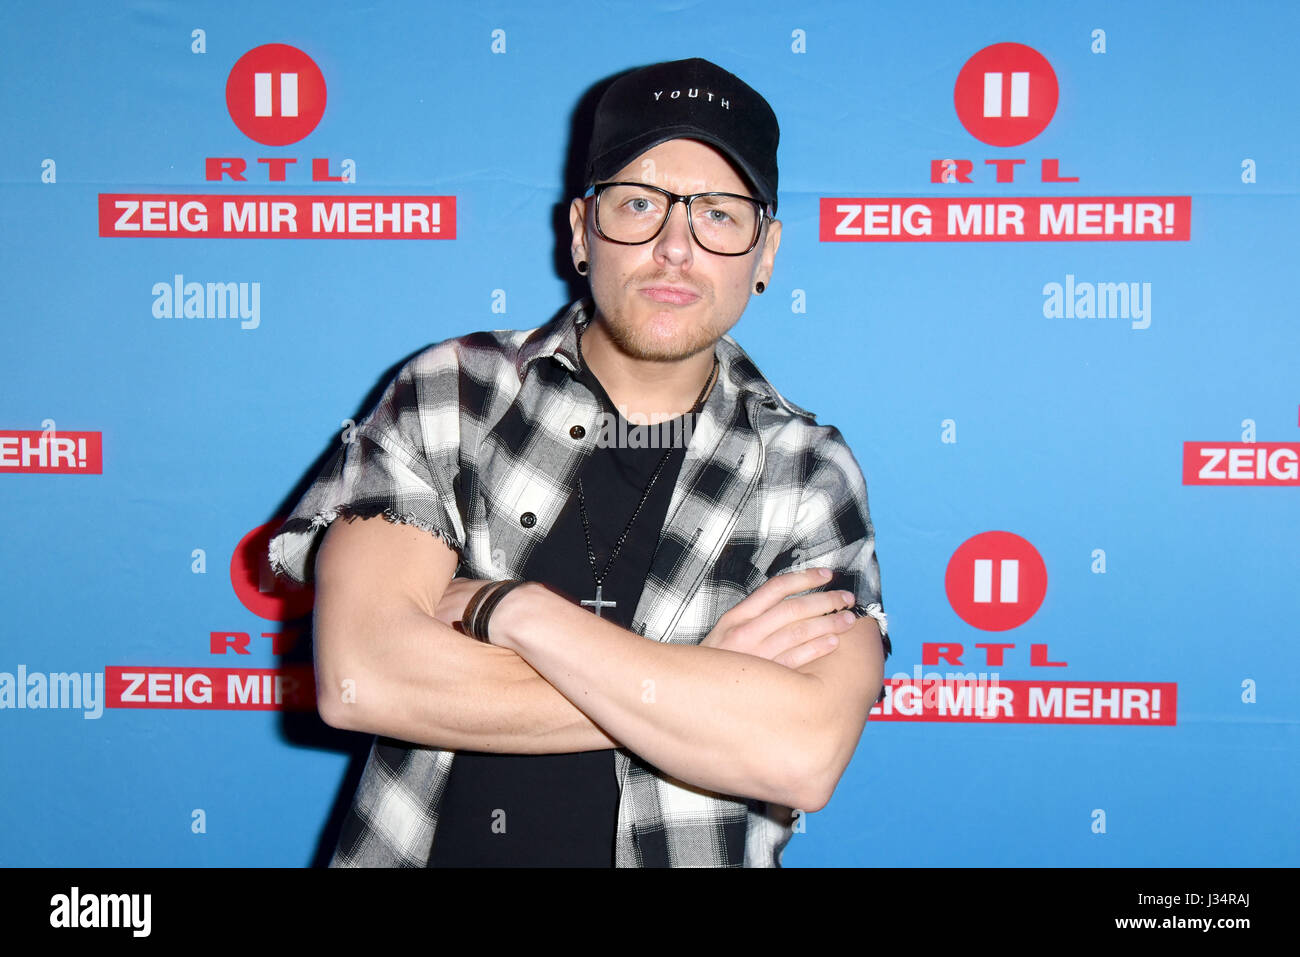 Fan party of german RTL2 TV series 'Koeln 50667' at Cage Club - Arrivals  Featuring: Danny Liedtke (Kevin Kev Bochow) Where: Cologne, Germany When: 01 Apr 2017 Credit: WENN.com Stock Photo